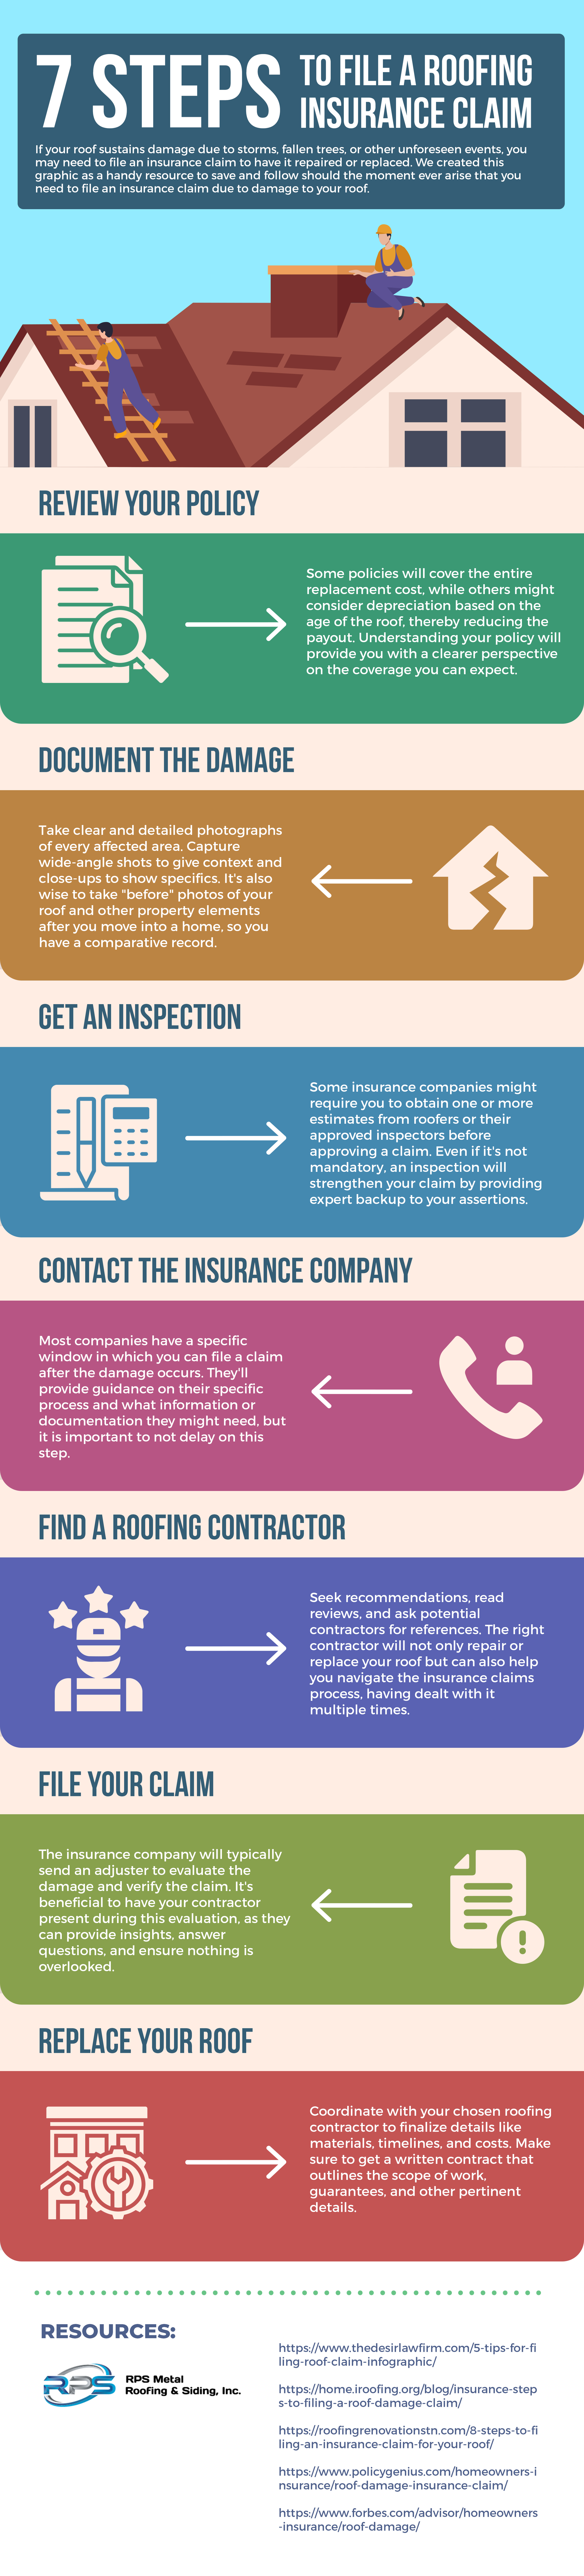 7 steps to file a roofing insurance claim infographic